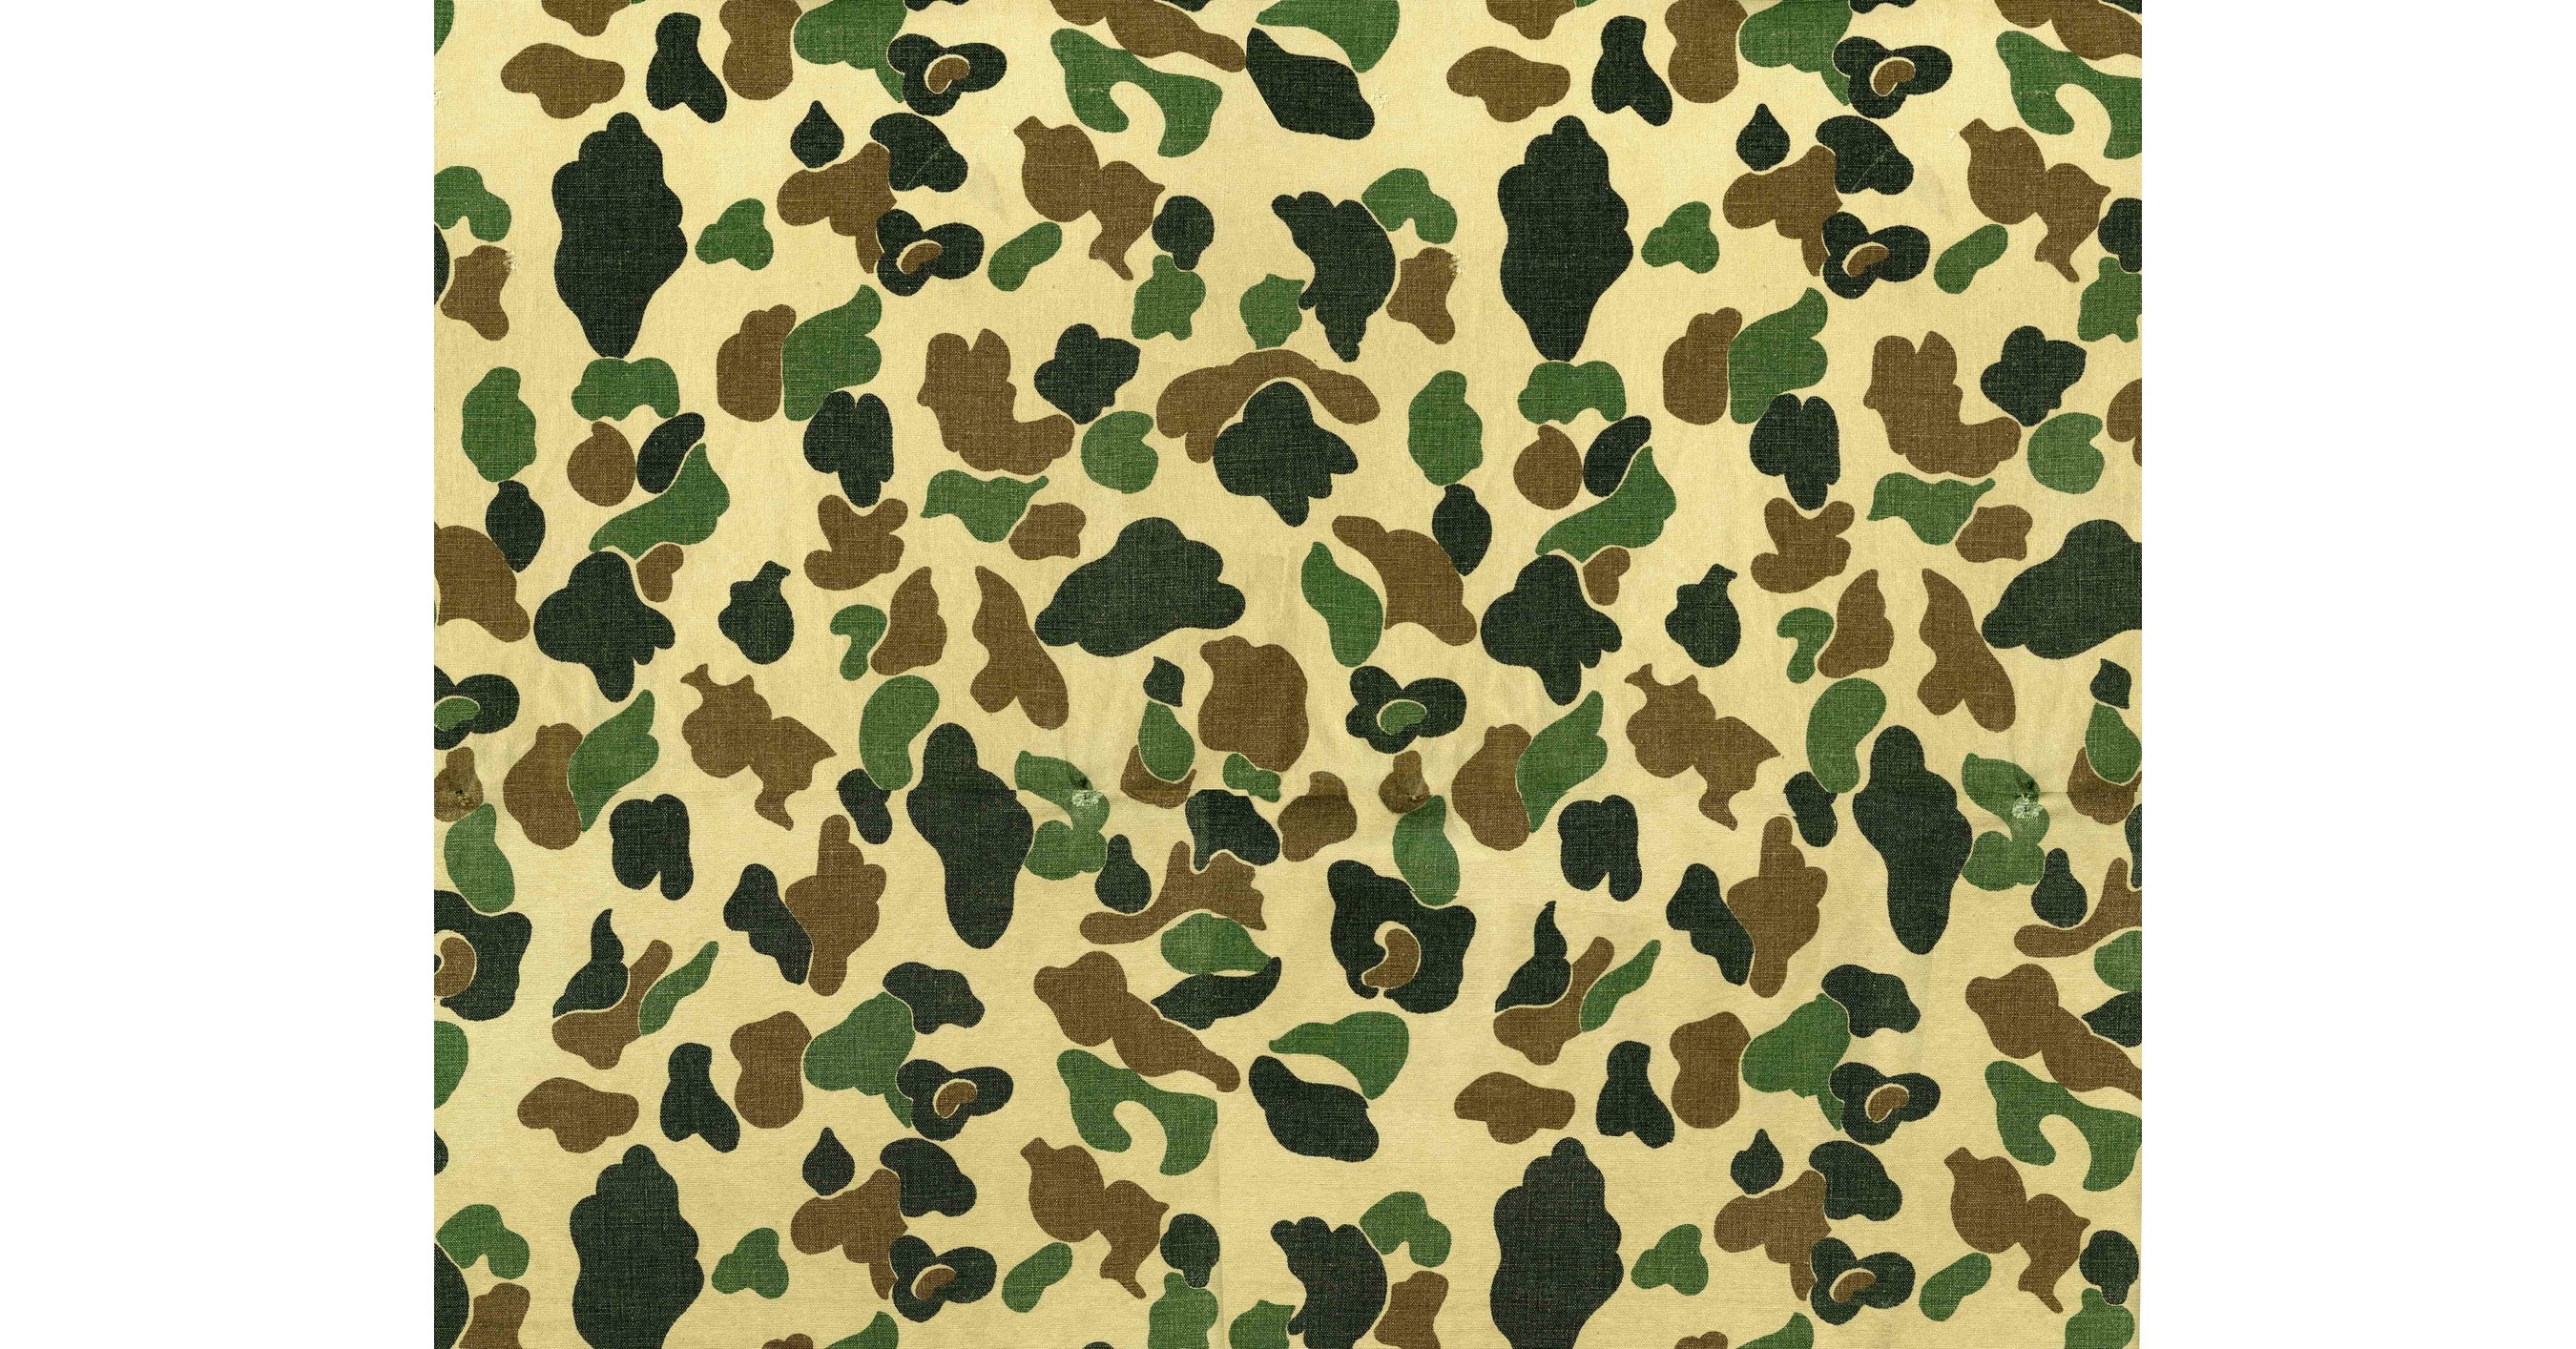 Inspired By Company's Heritage, Carhartt Reinvents Original Camo